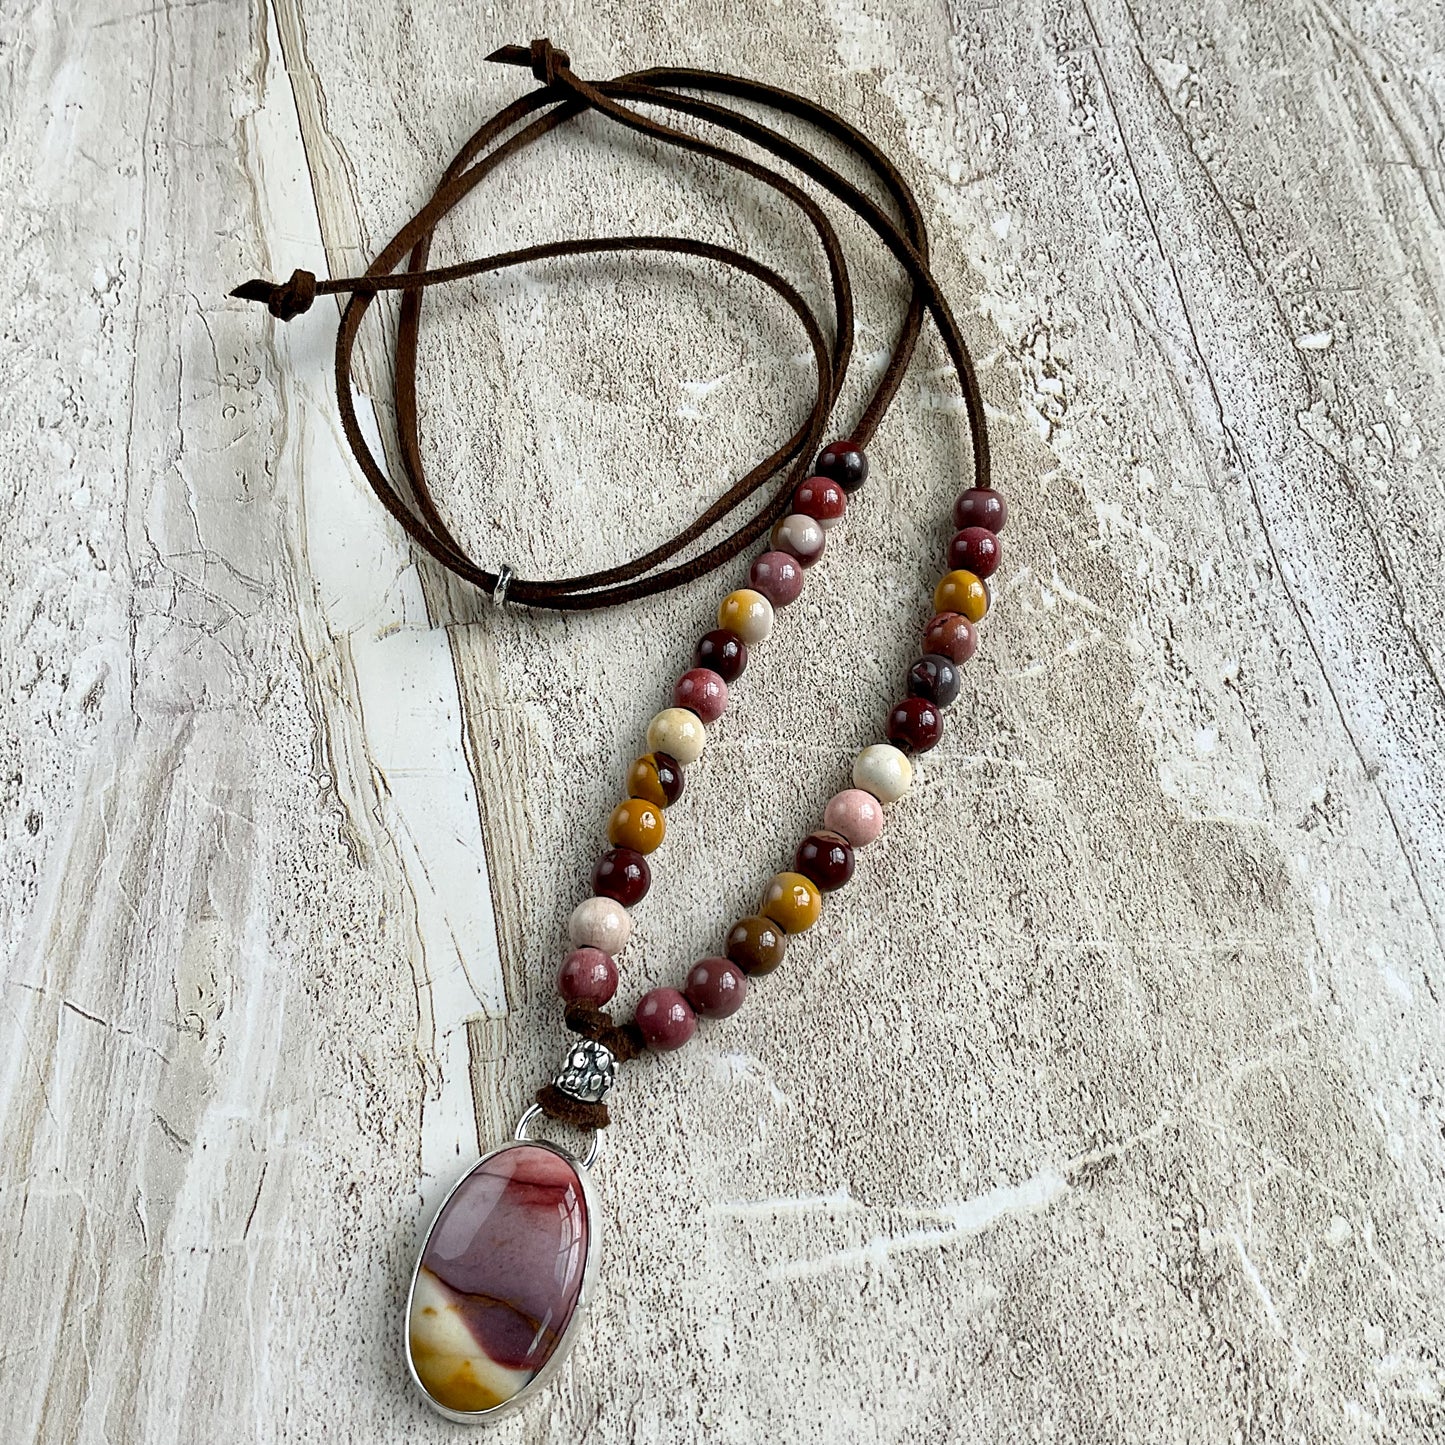 Wearable Sunset Necklace